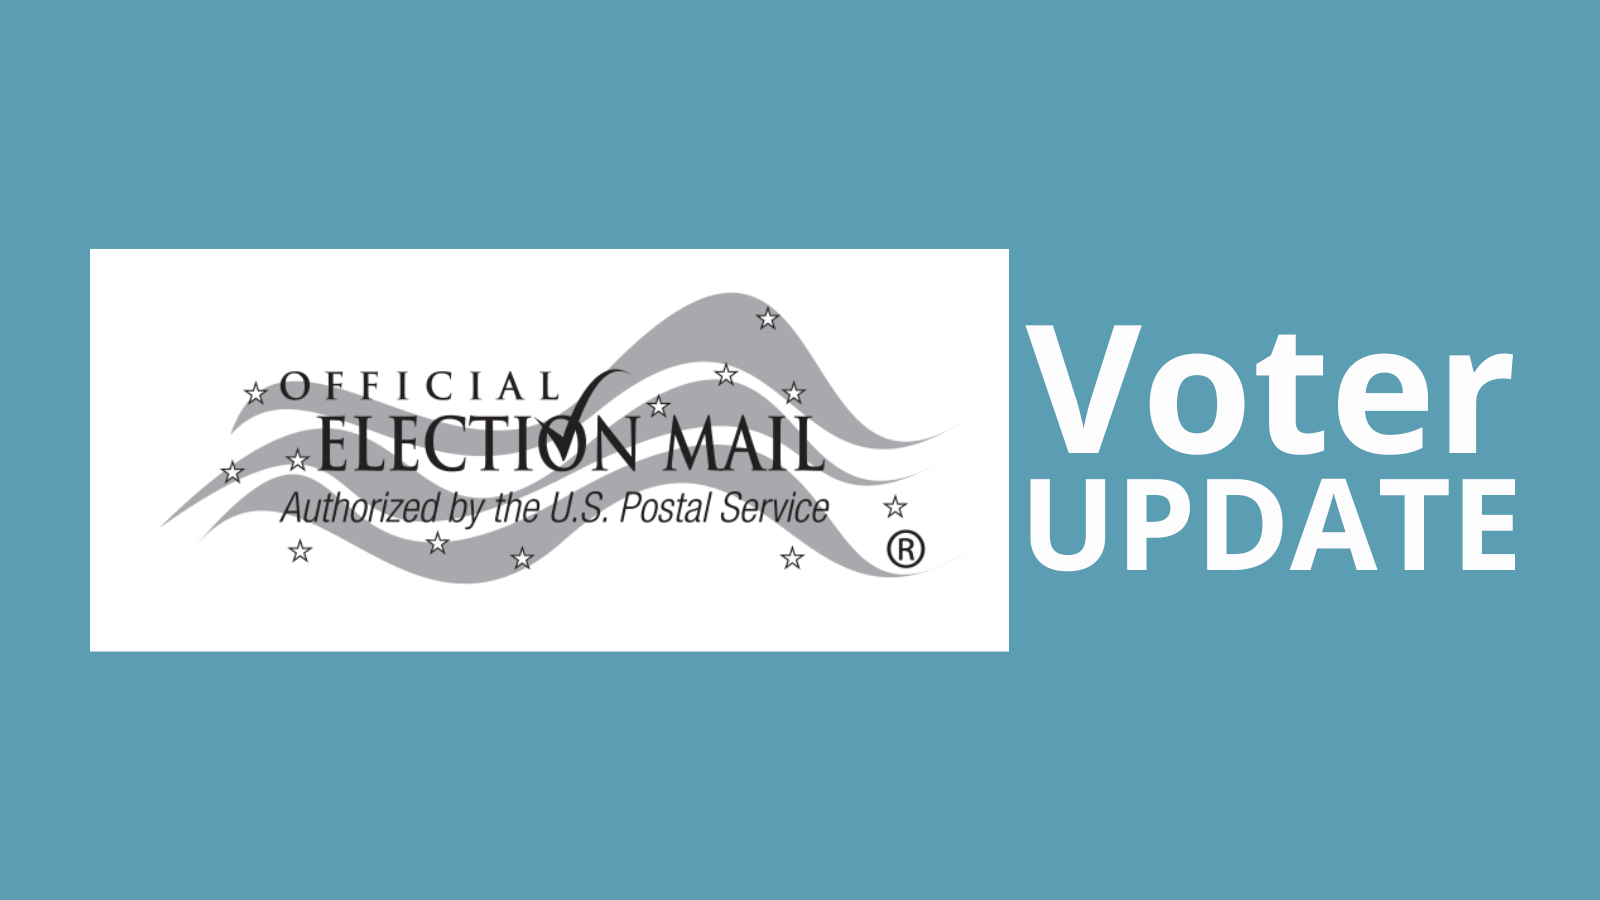 Blue background, with a white rectangle box that has the text "Official Election Mail Authorized by the U.S. Postal Service. White Text says "Voter Update".